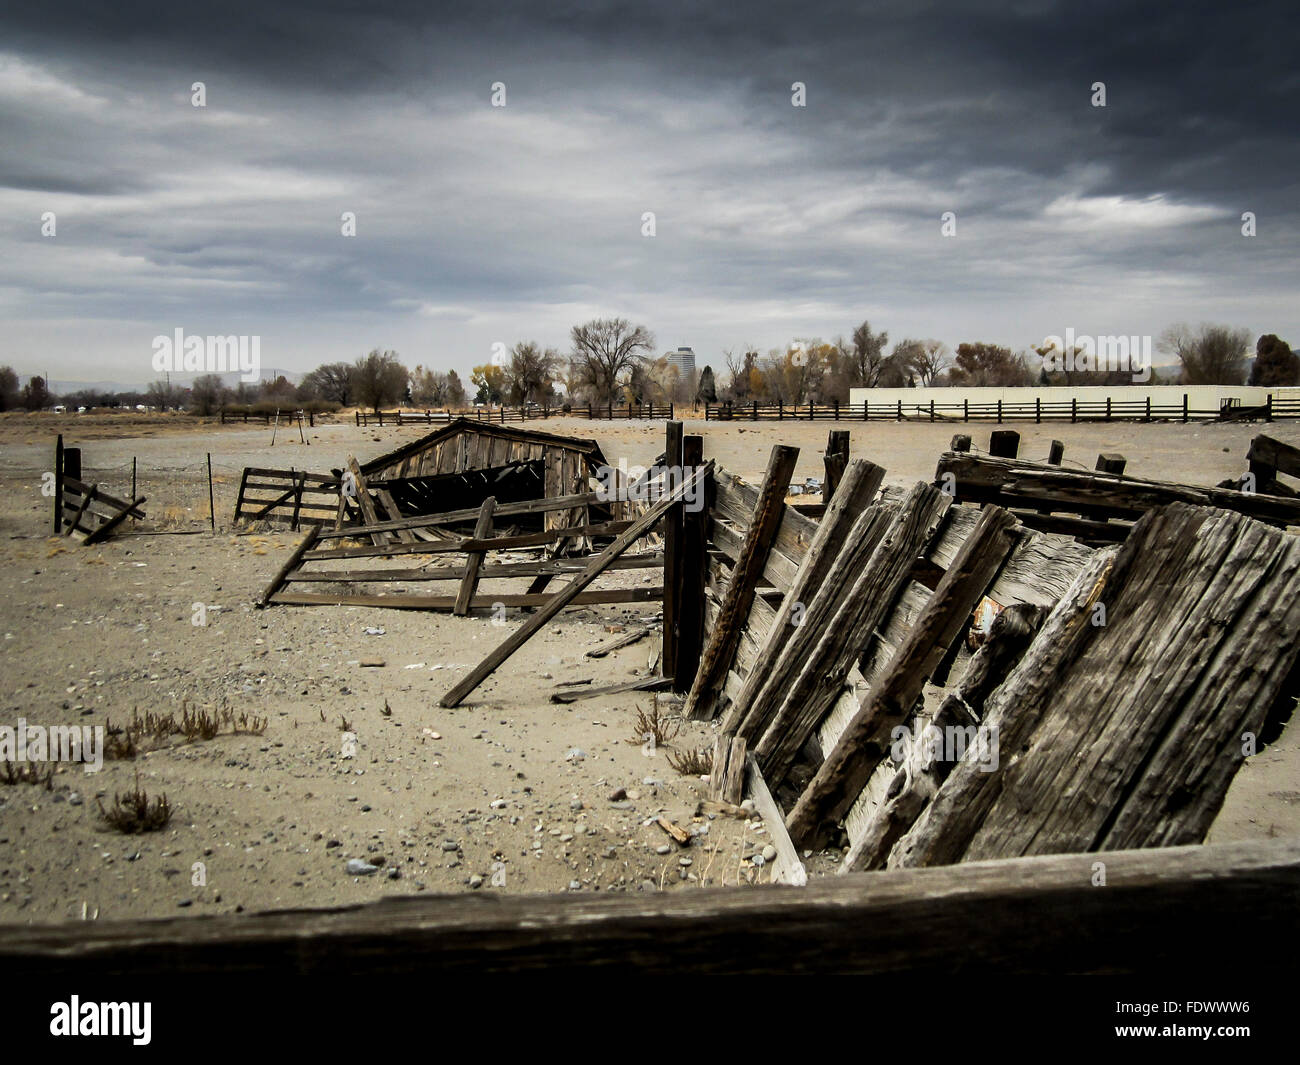 A ramshackle old wooden building in desolate open land, on a dreary winter's day. Stock Photo